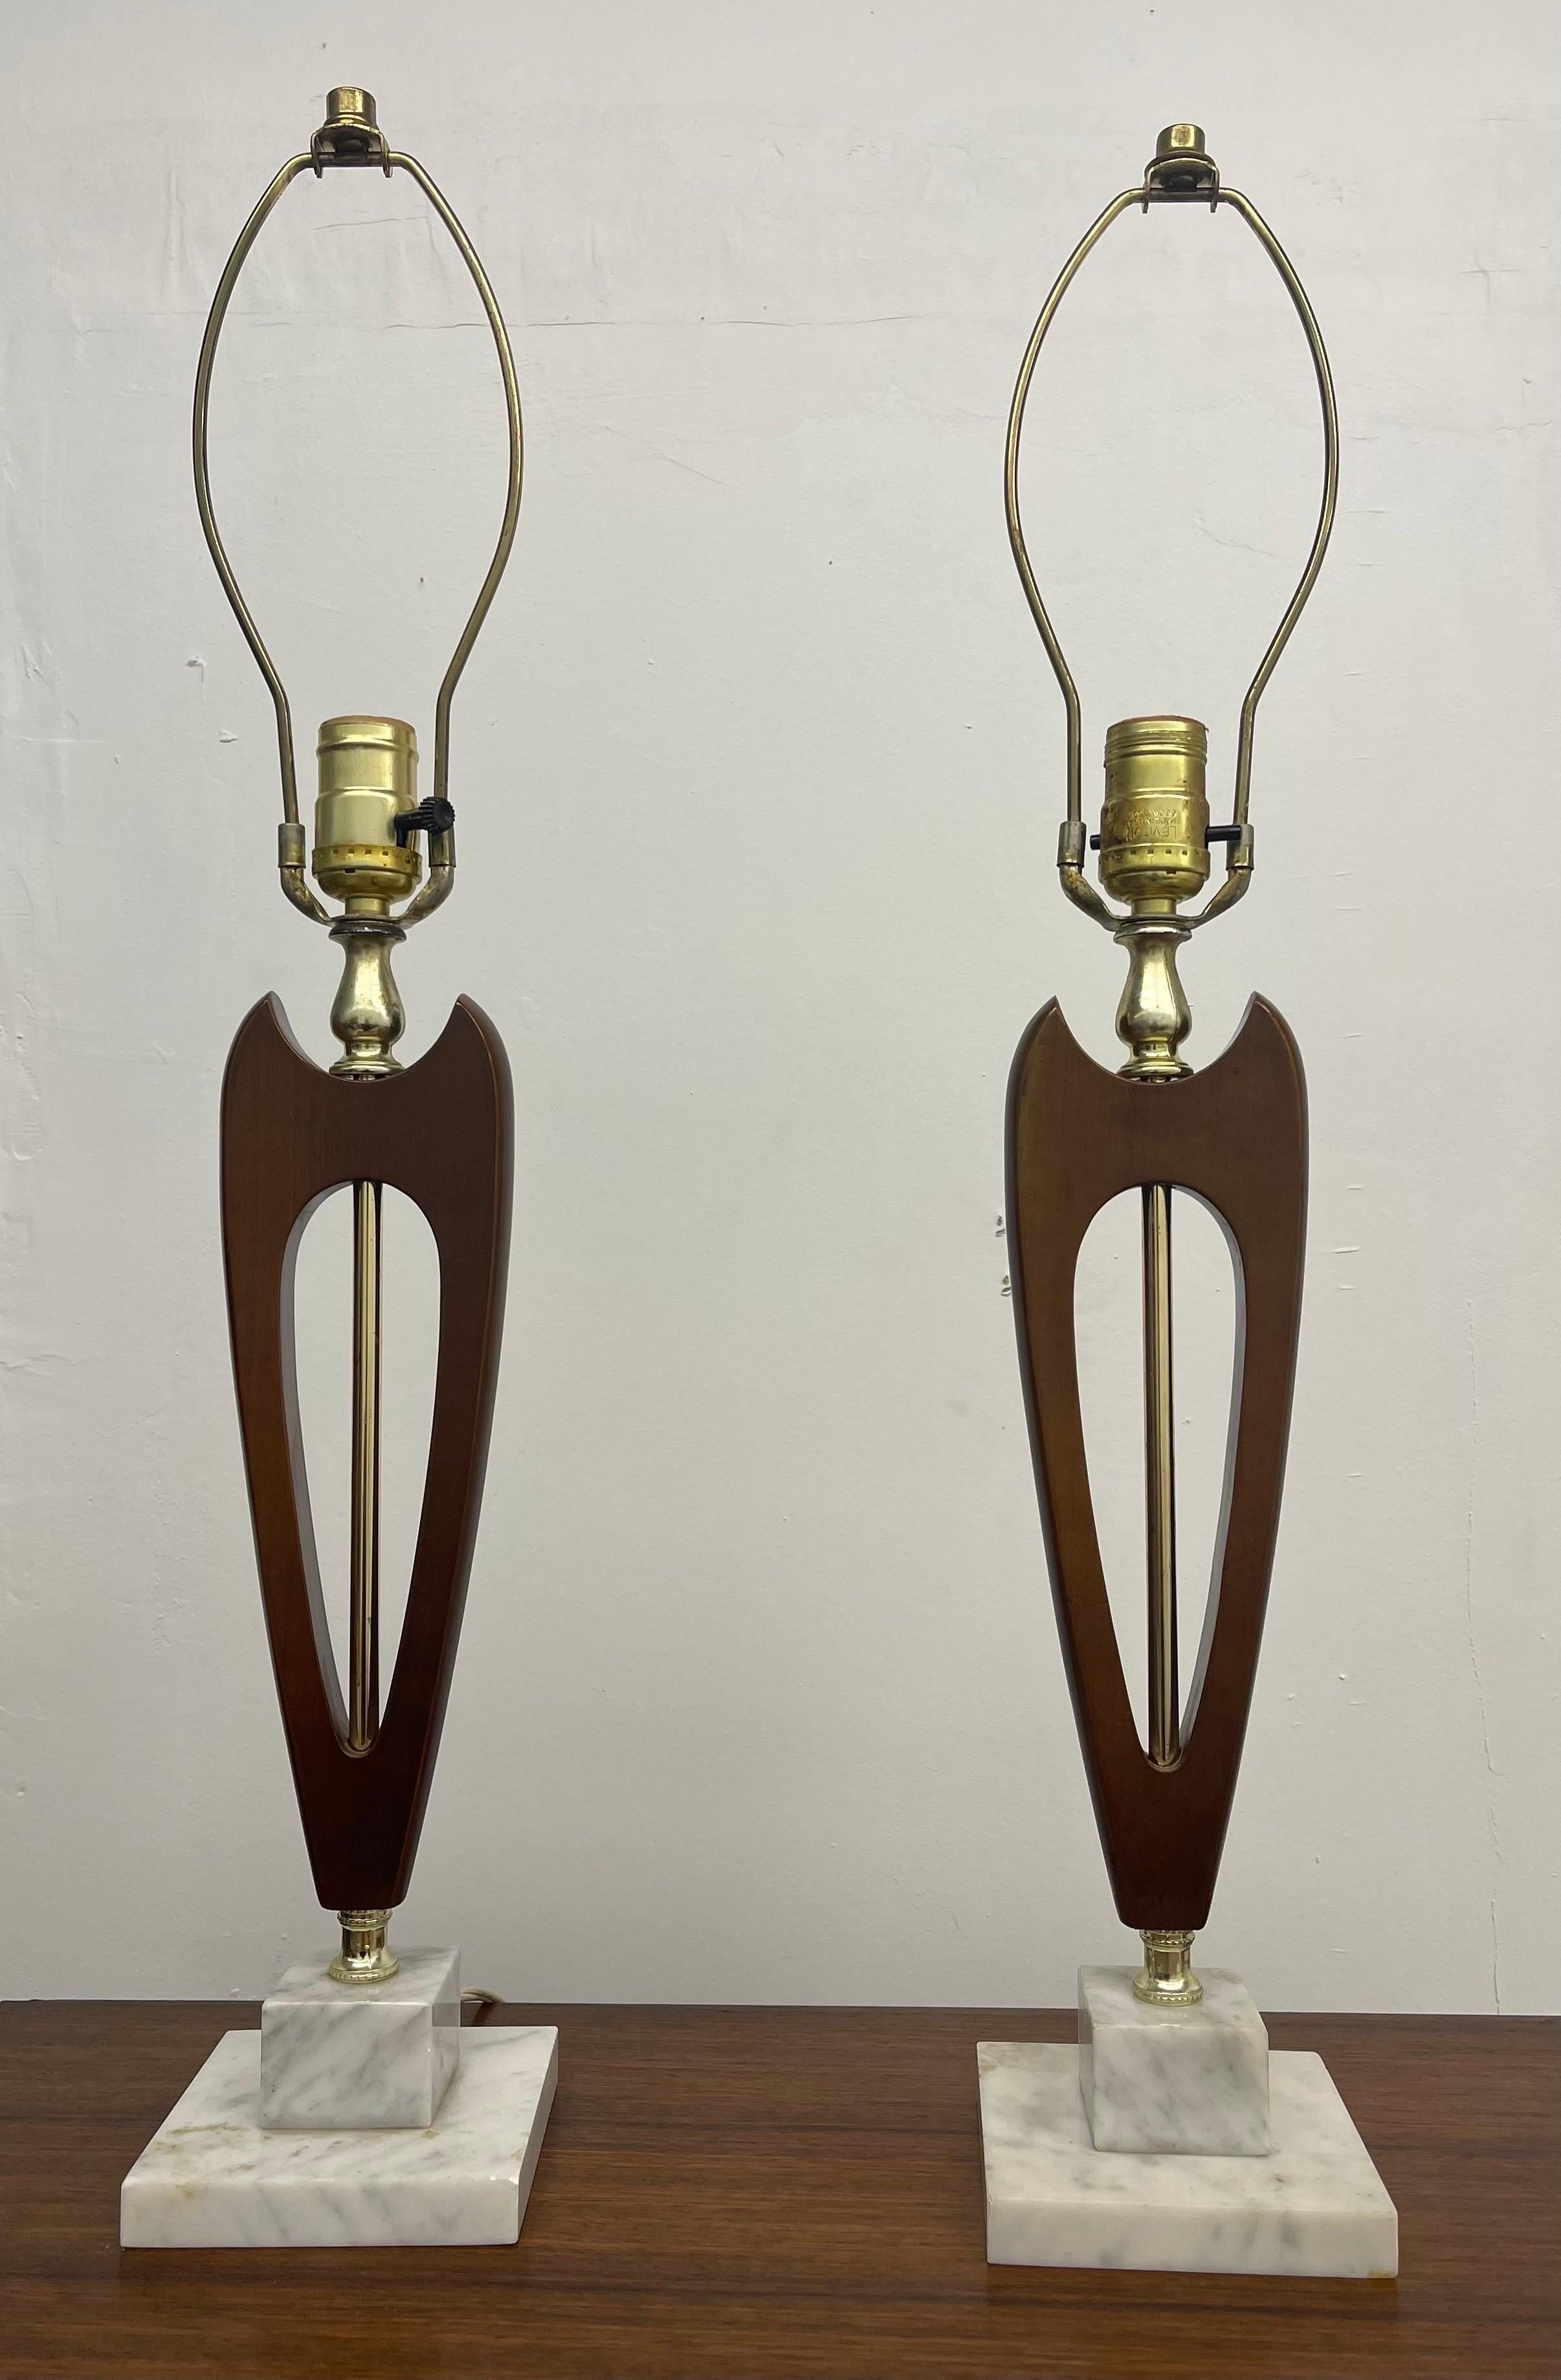 Vintage Mid-Century Modern lamps set of 2

Dimensions. Approx 4 1/2 W ; 26 H ; 4 1/2 D.